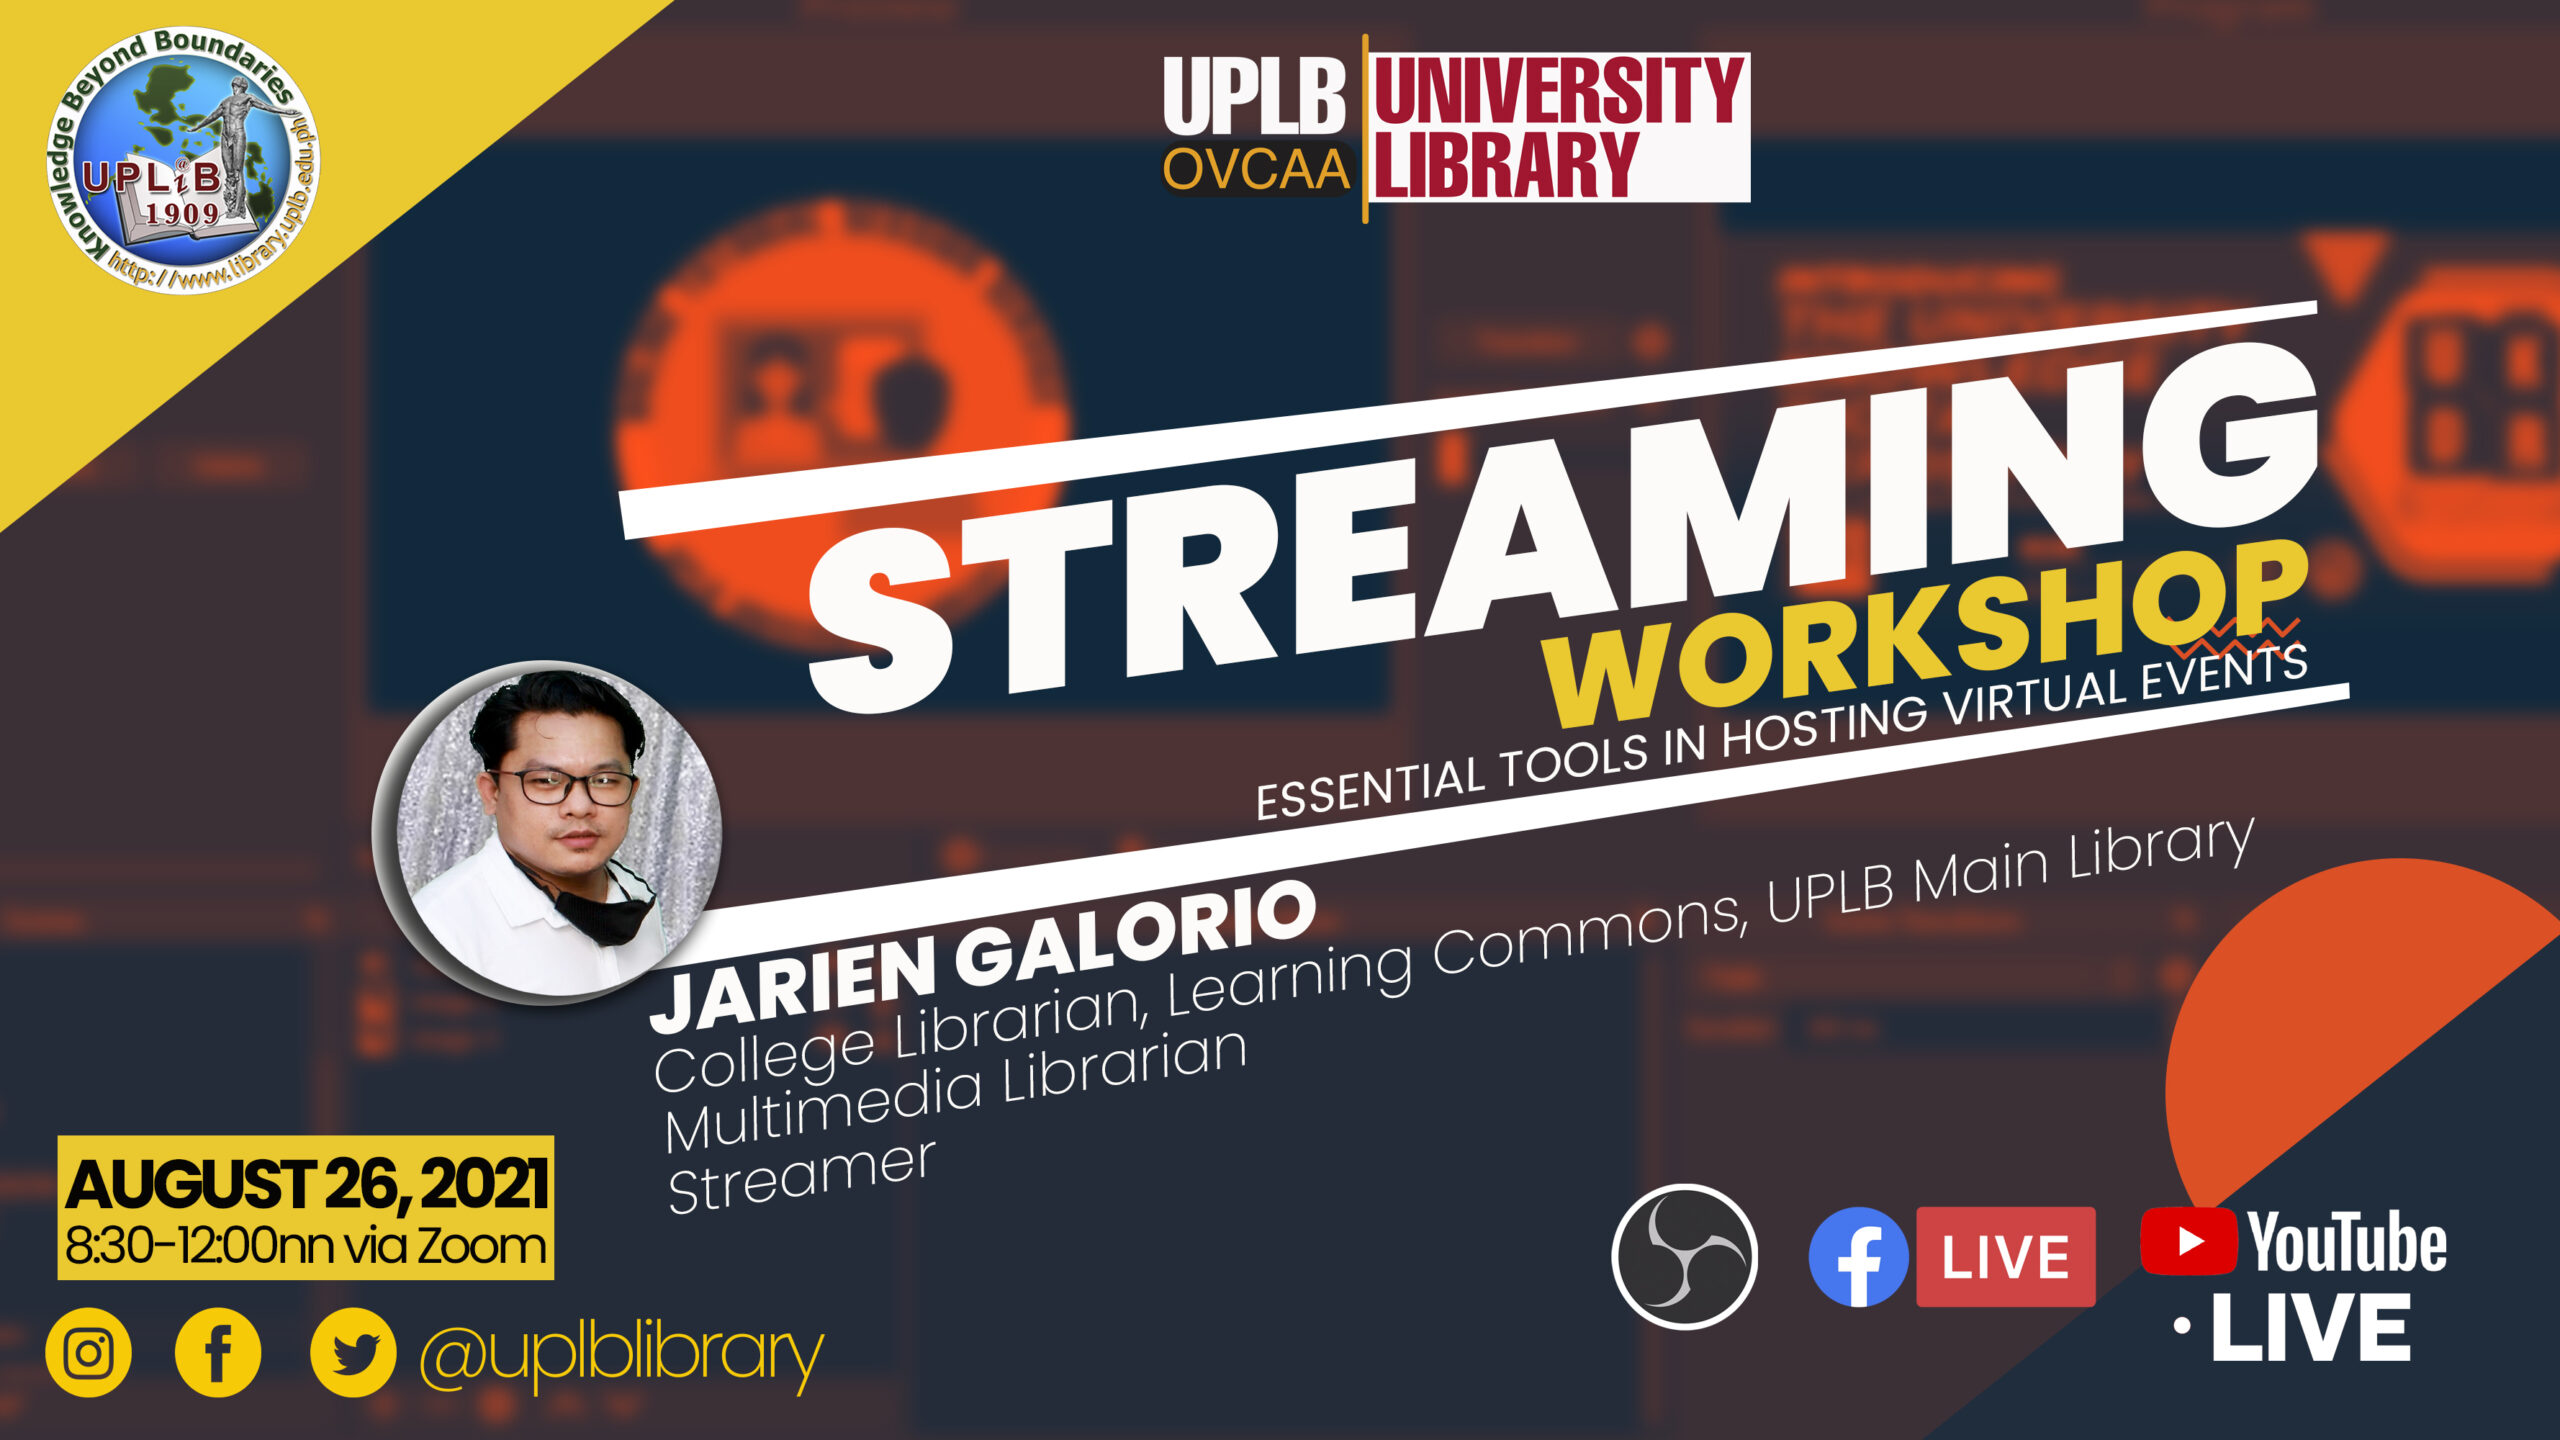 Univ Lib conducts webinar on streaming workshop for library staff